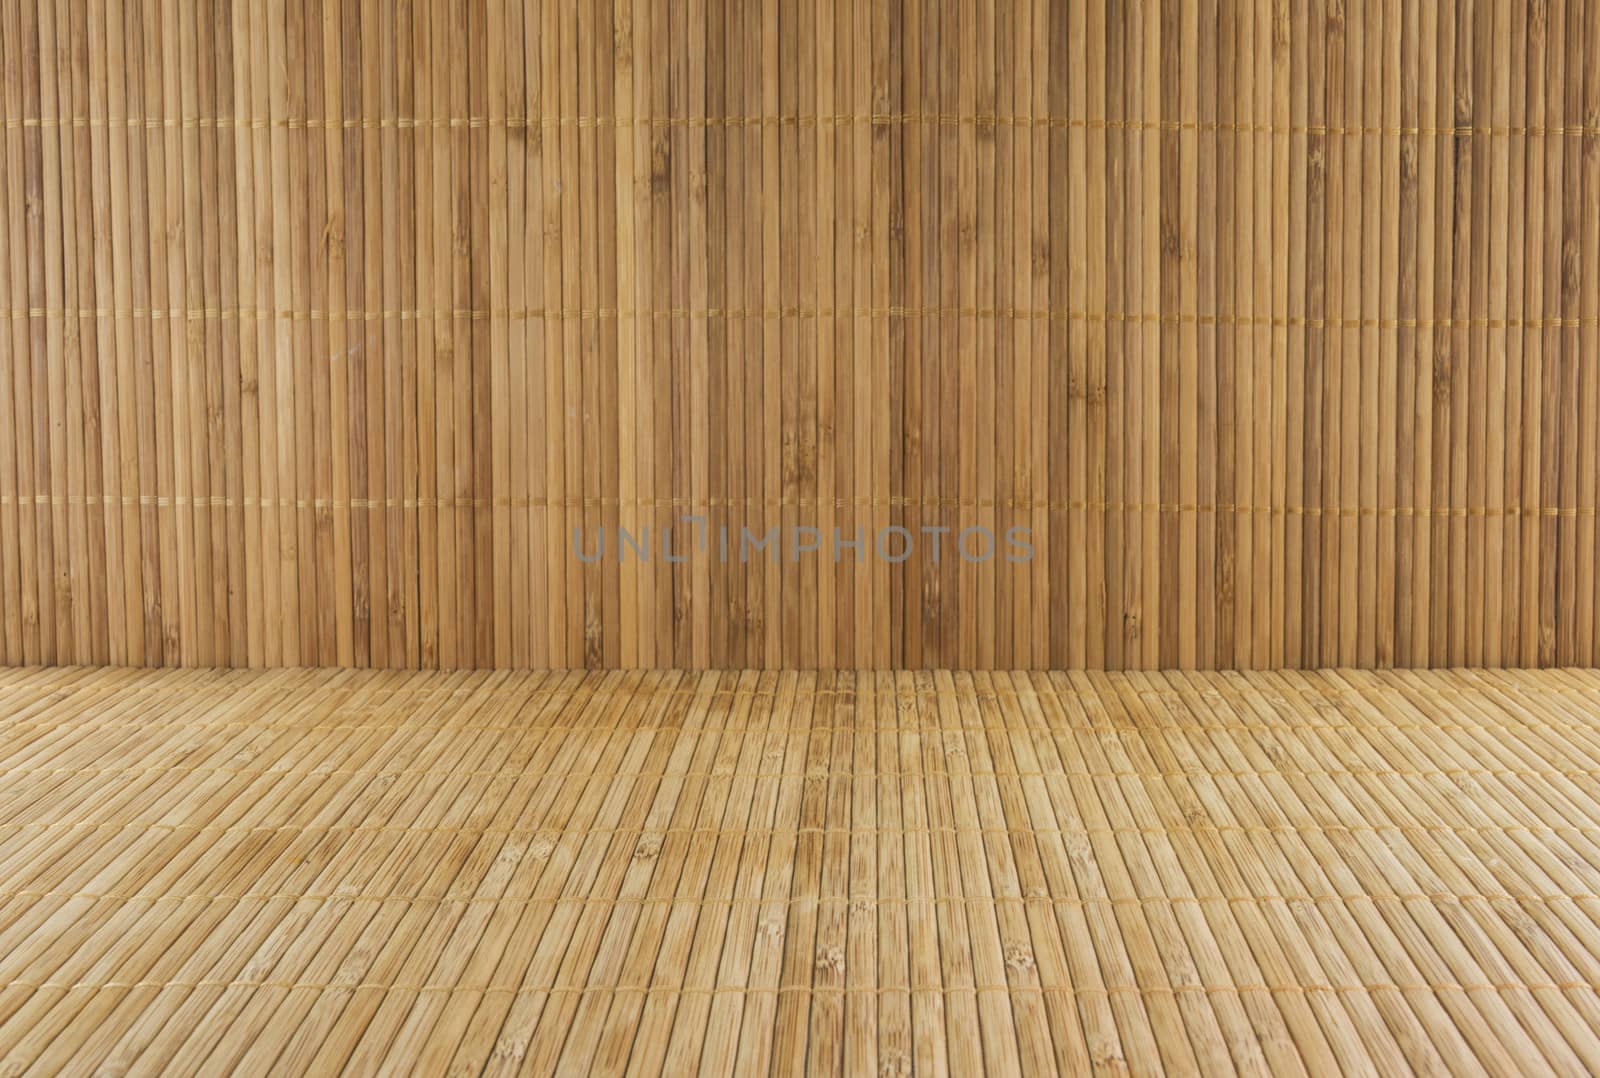 bamboo background by compuinfoto